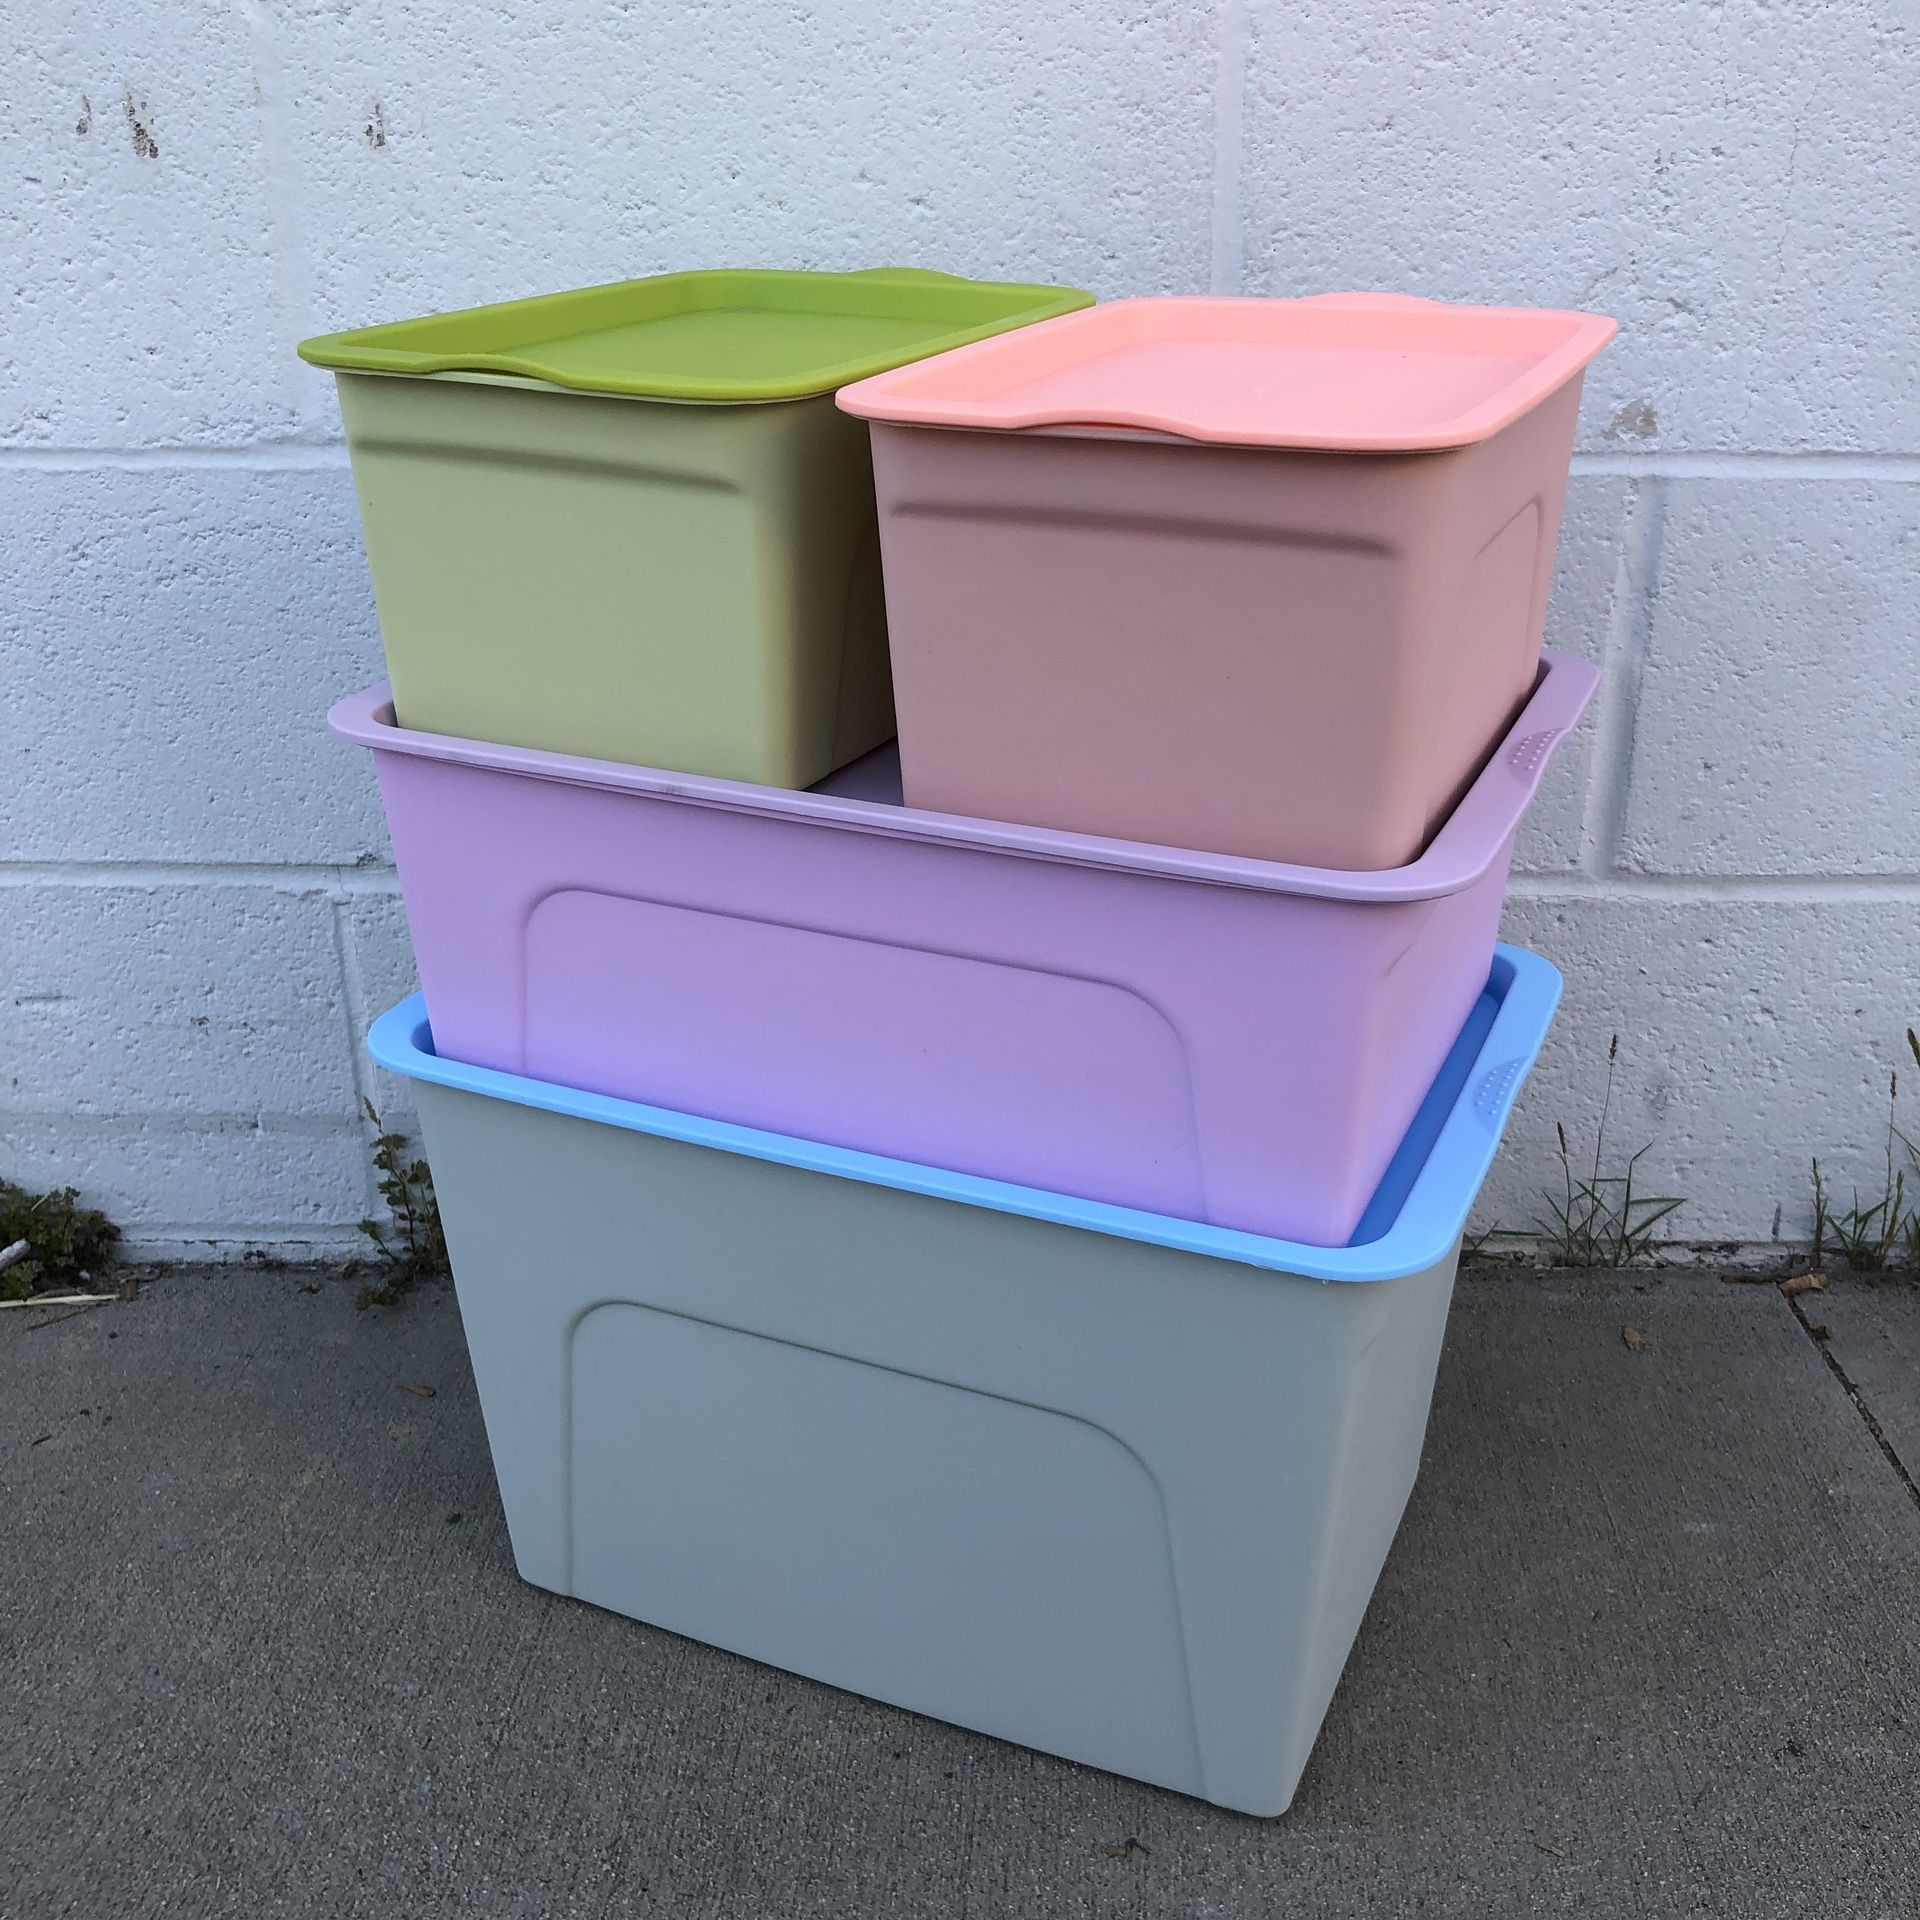 New Cute Mix Colors Storage Box Set With Lid Set of 4 Plastic Containers For Household Kitchen Makeup Desktop Organizer